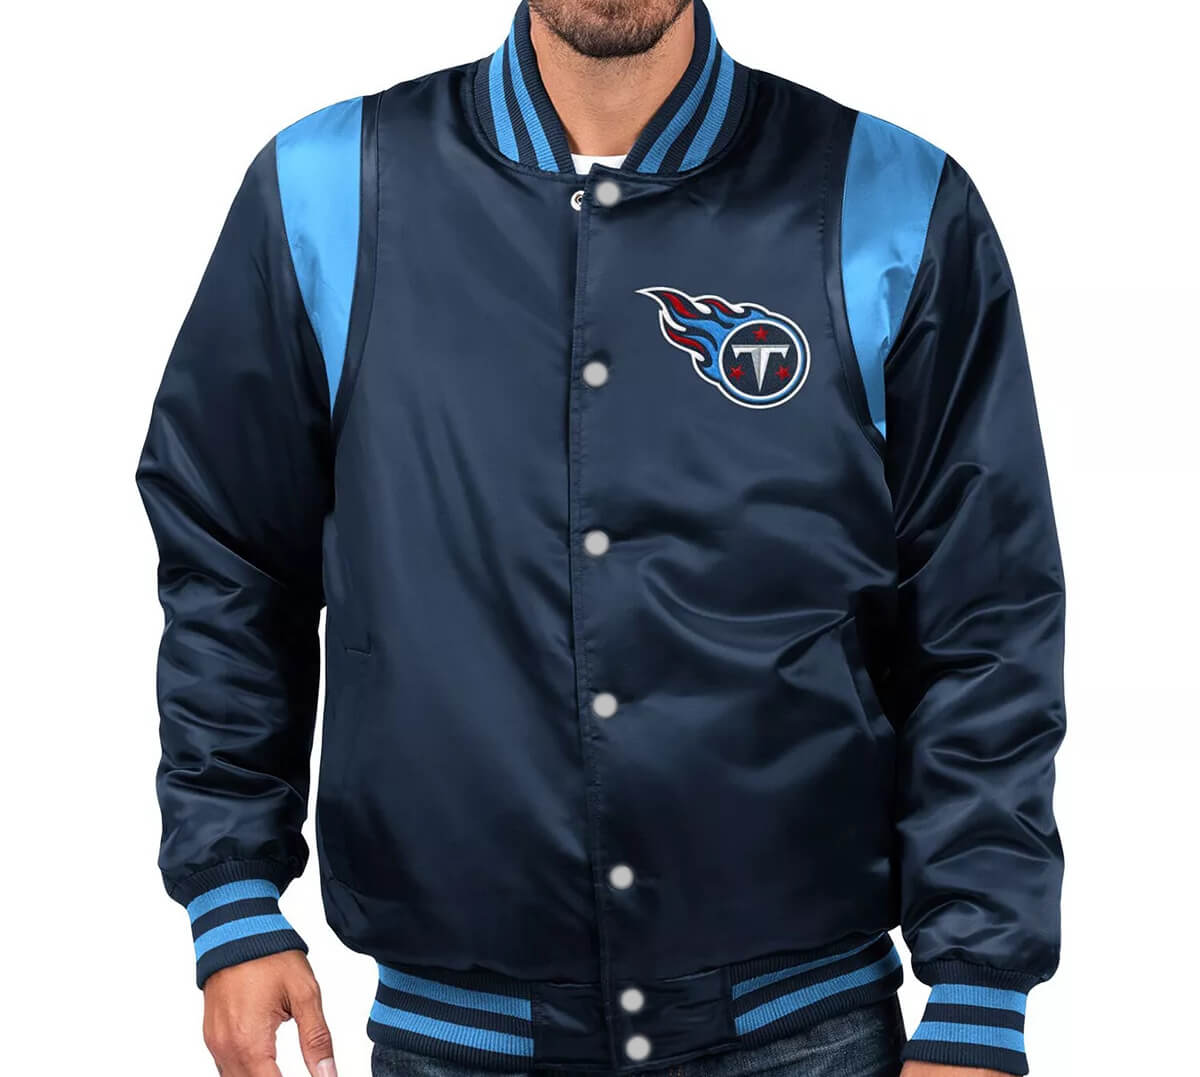 Maker of Jacket Sports Leagues Jackets NFL Team Tennessee Titans Satin Snap